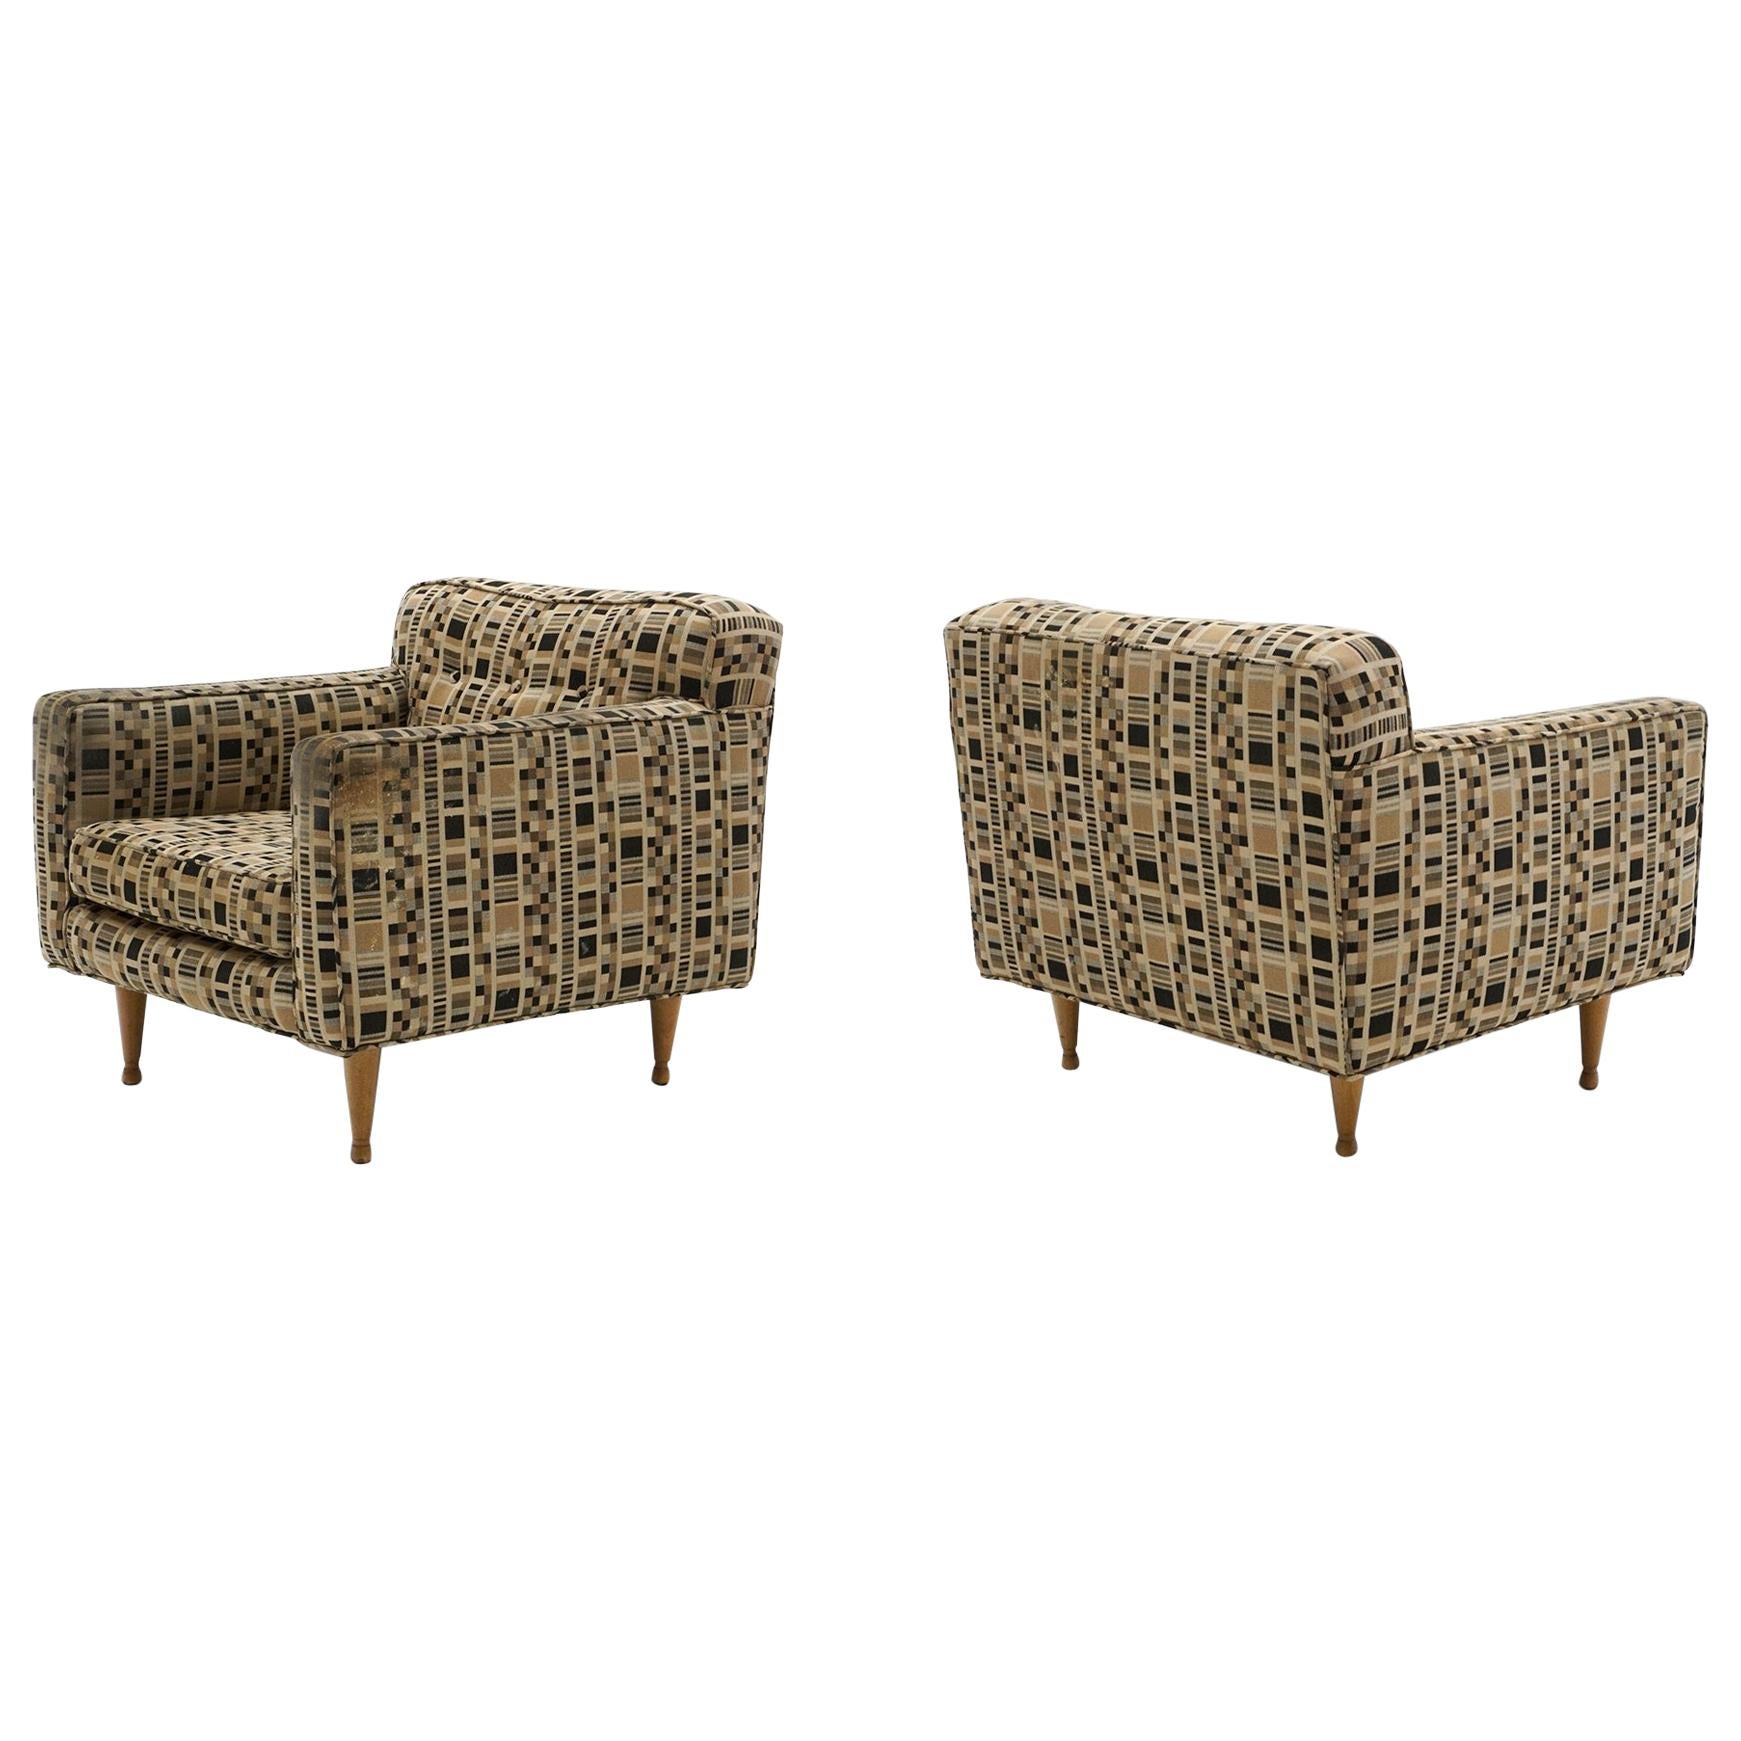 Pair of Lounge Chairs by Edward Wormley for Dunbar, Priced for Reupholstery